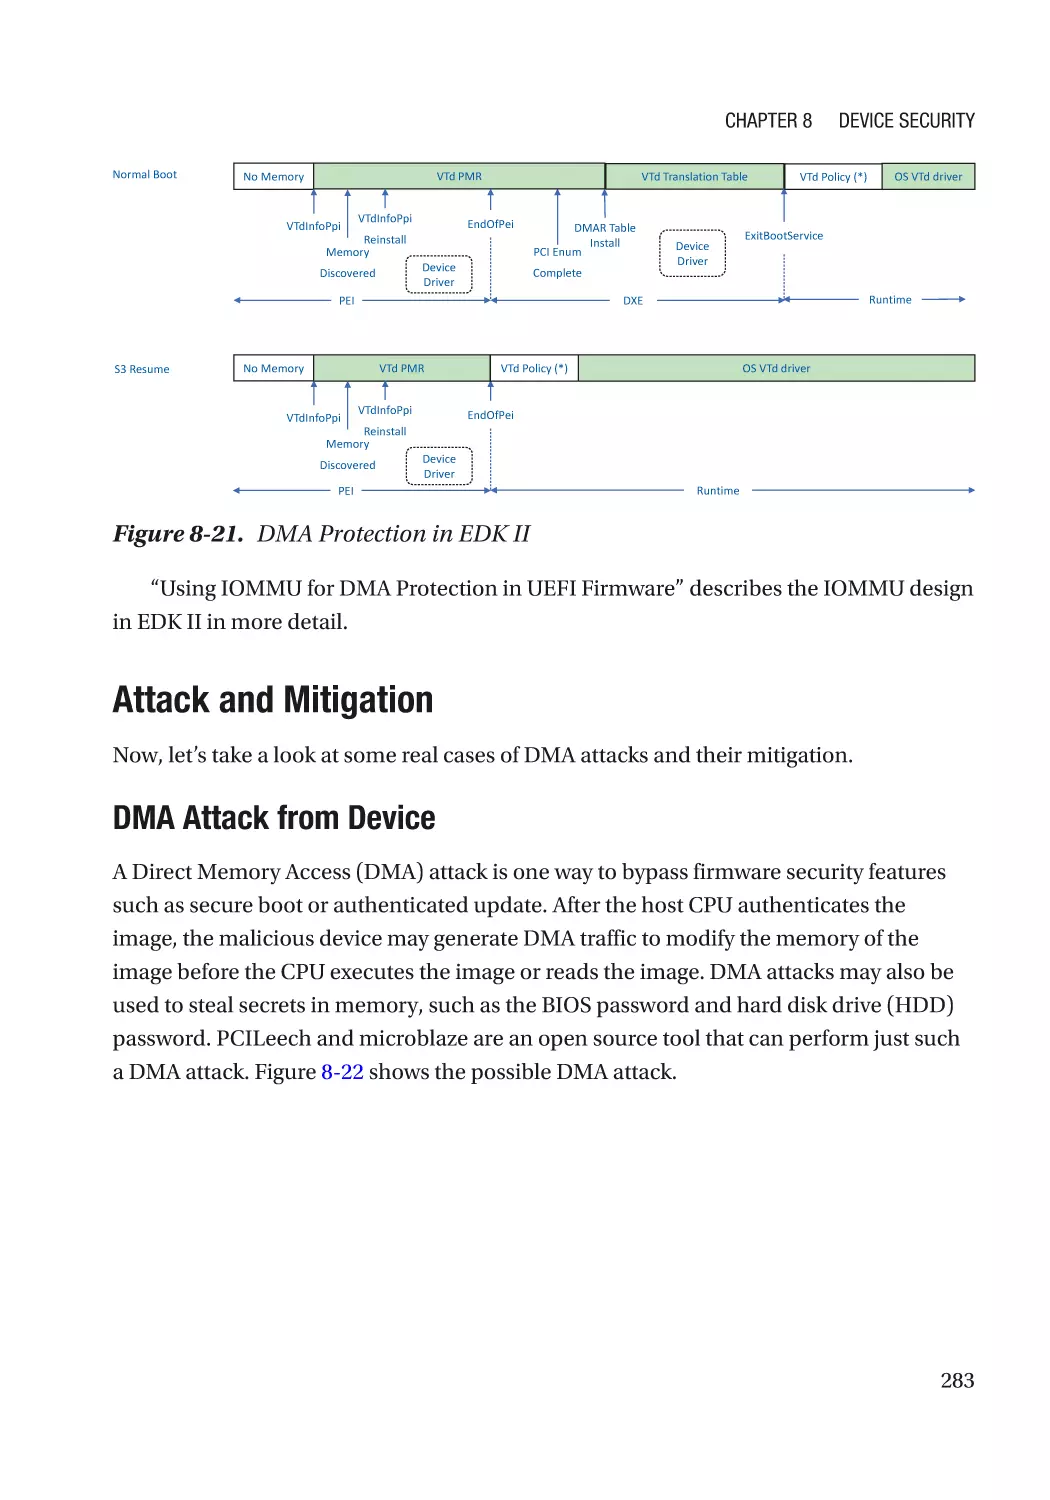 Attack and Mitigation
DMA Attack from Device